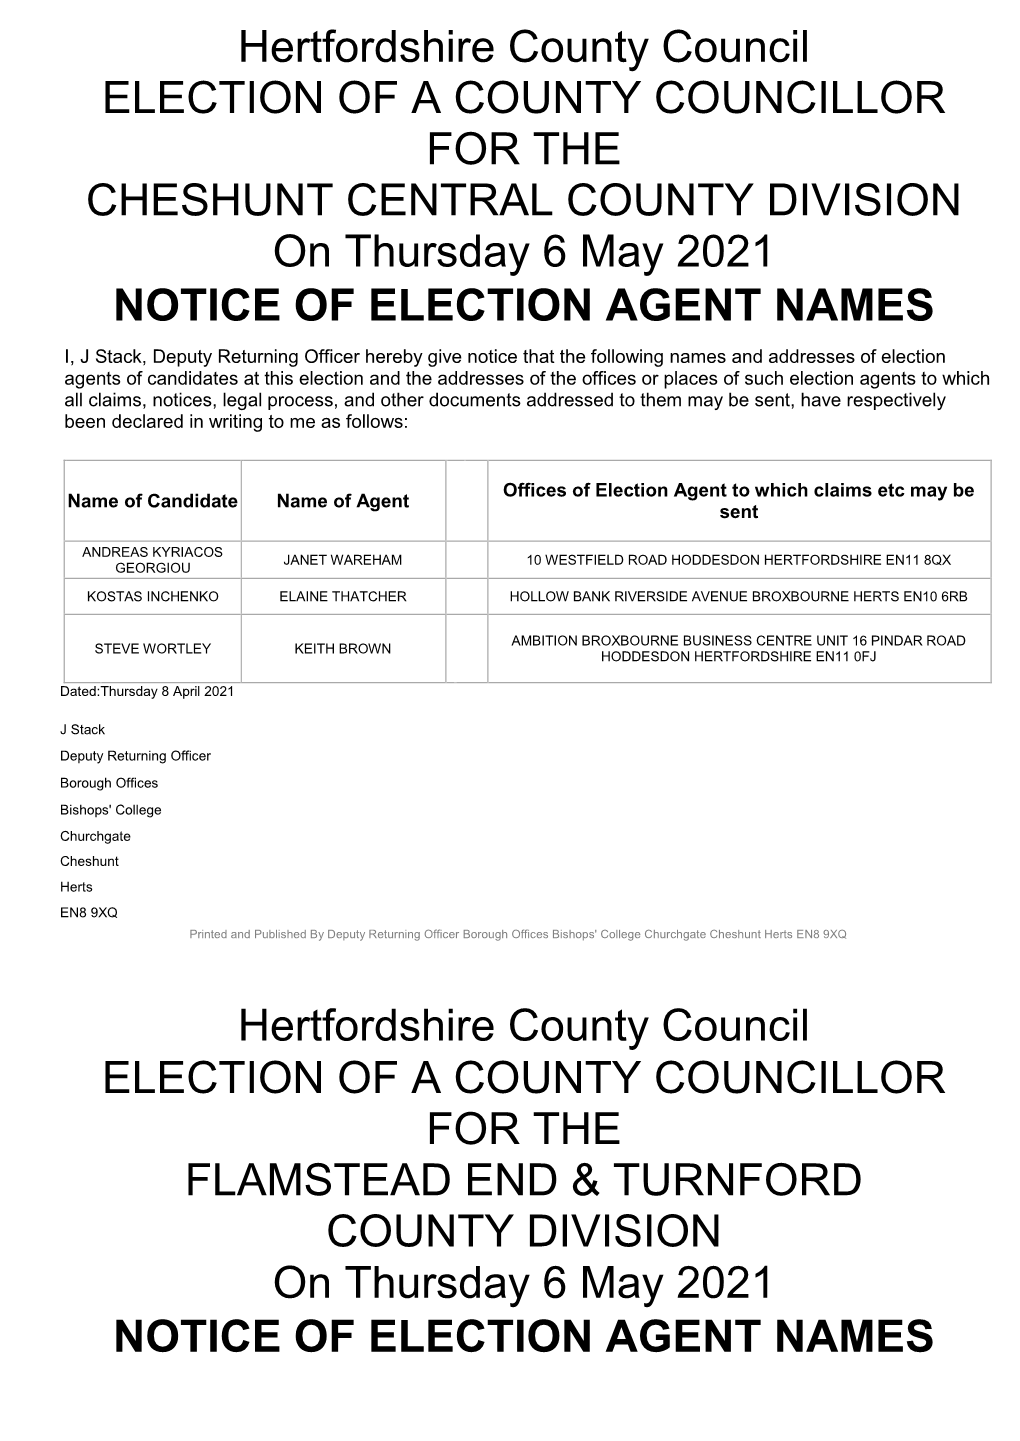 Hertfordshire County Council ELECTION of a COUNTY COUNCILLOR for the CHESHUNT CENTRAL COUNTY DIVISION on Thursday 6 May 2021